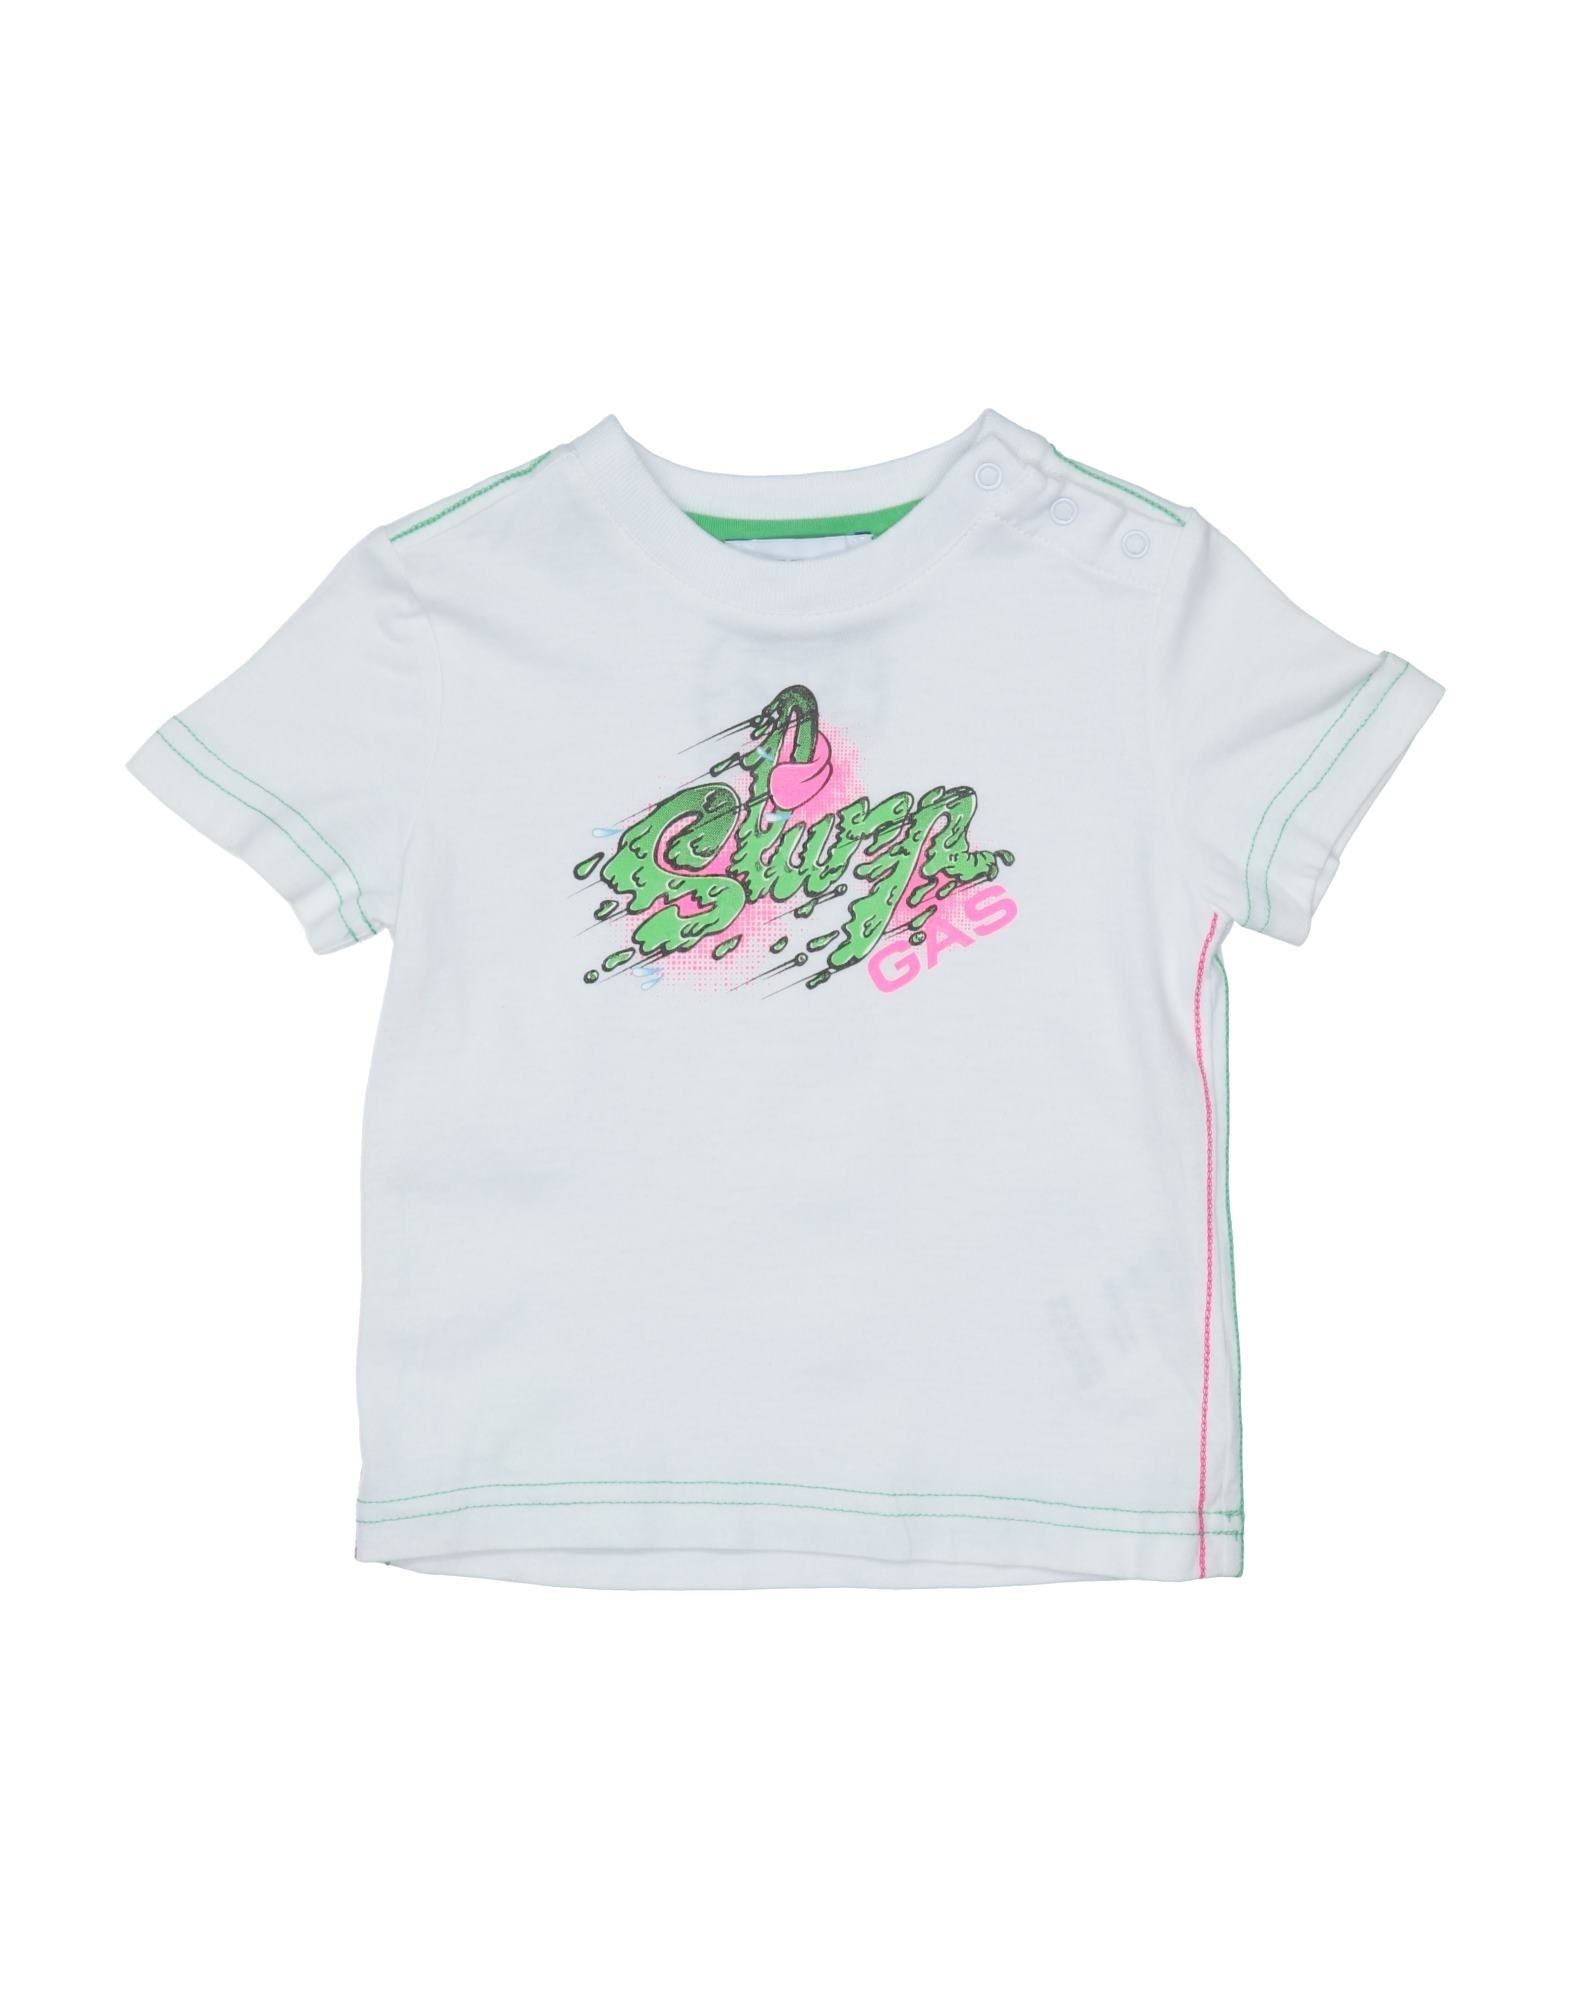 Gas Kids' T-shirts In White